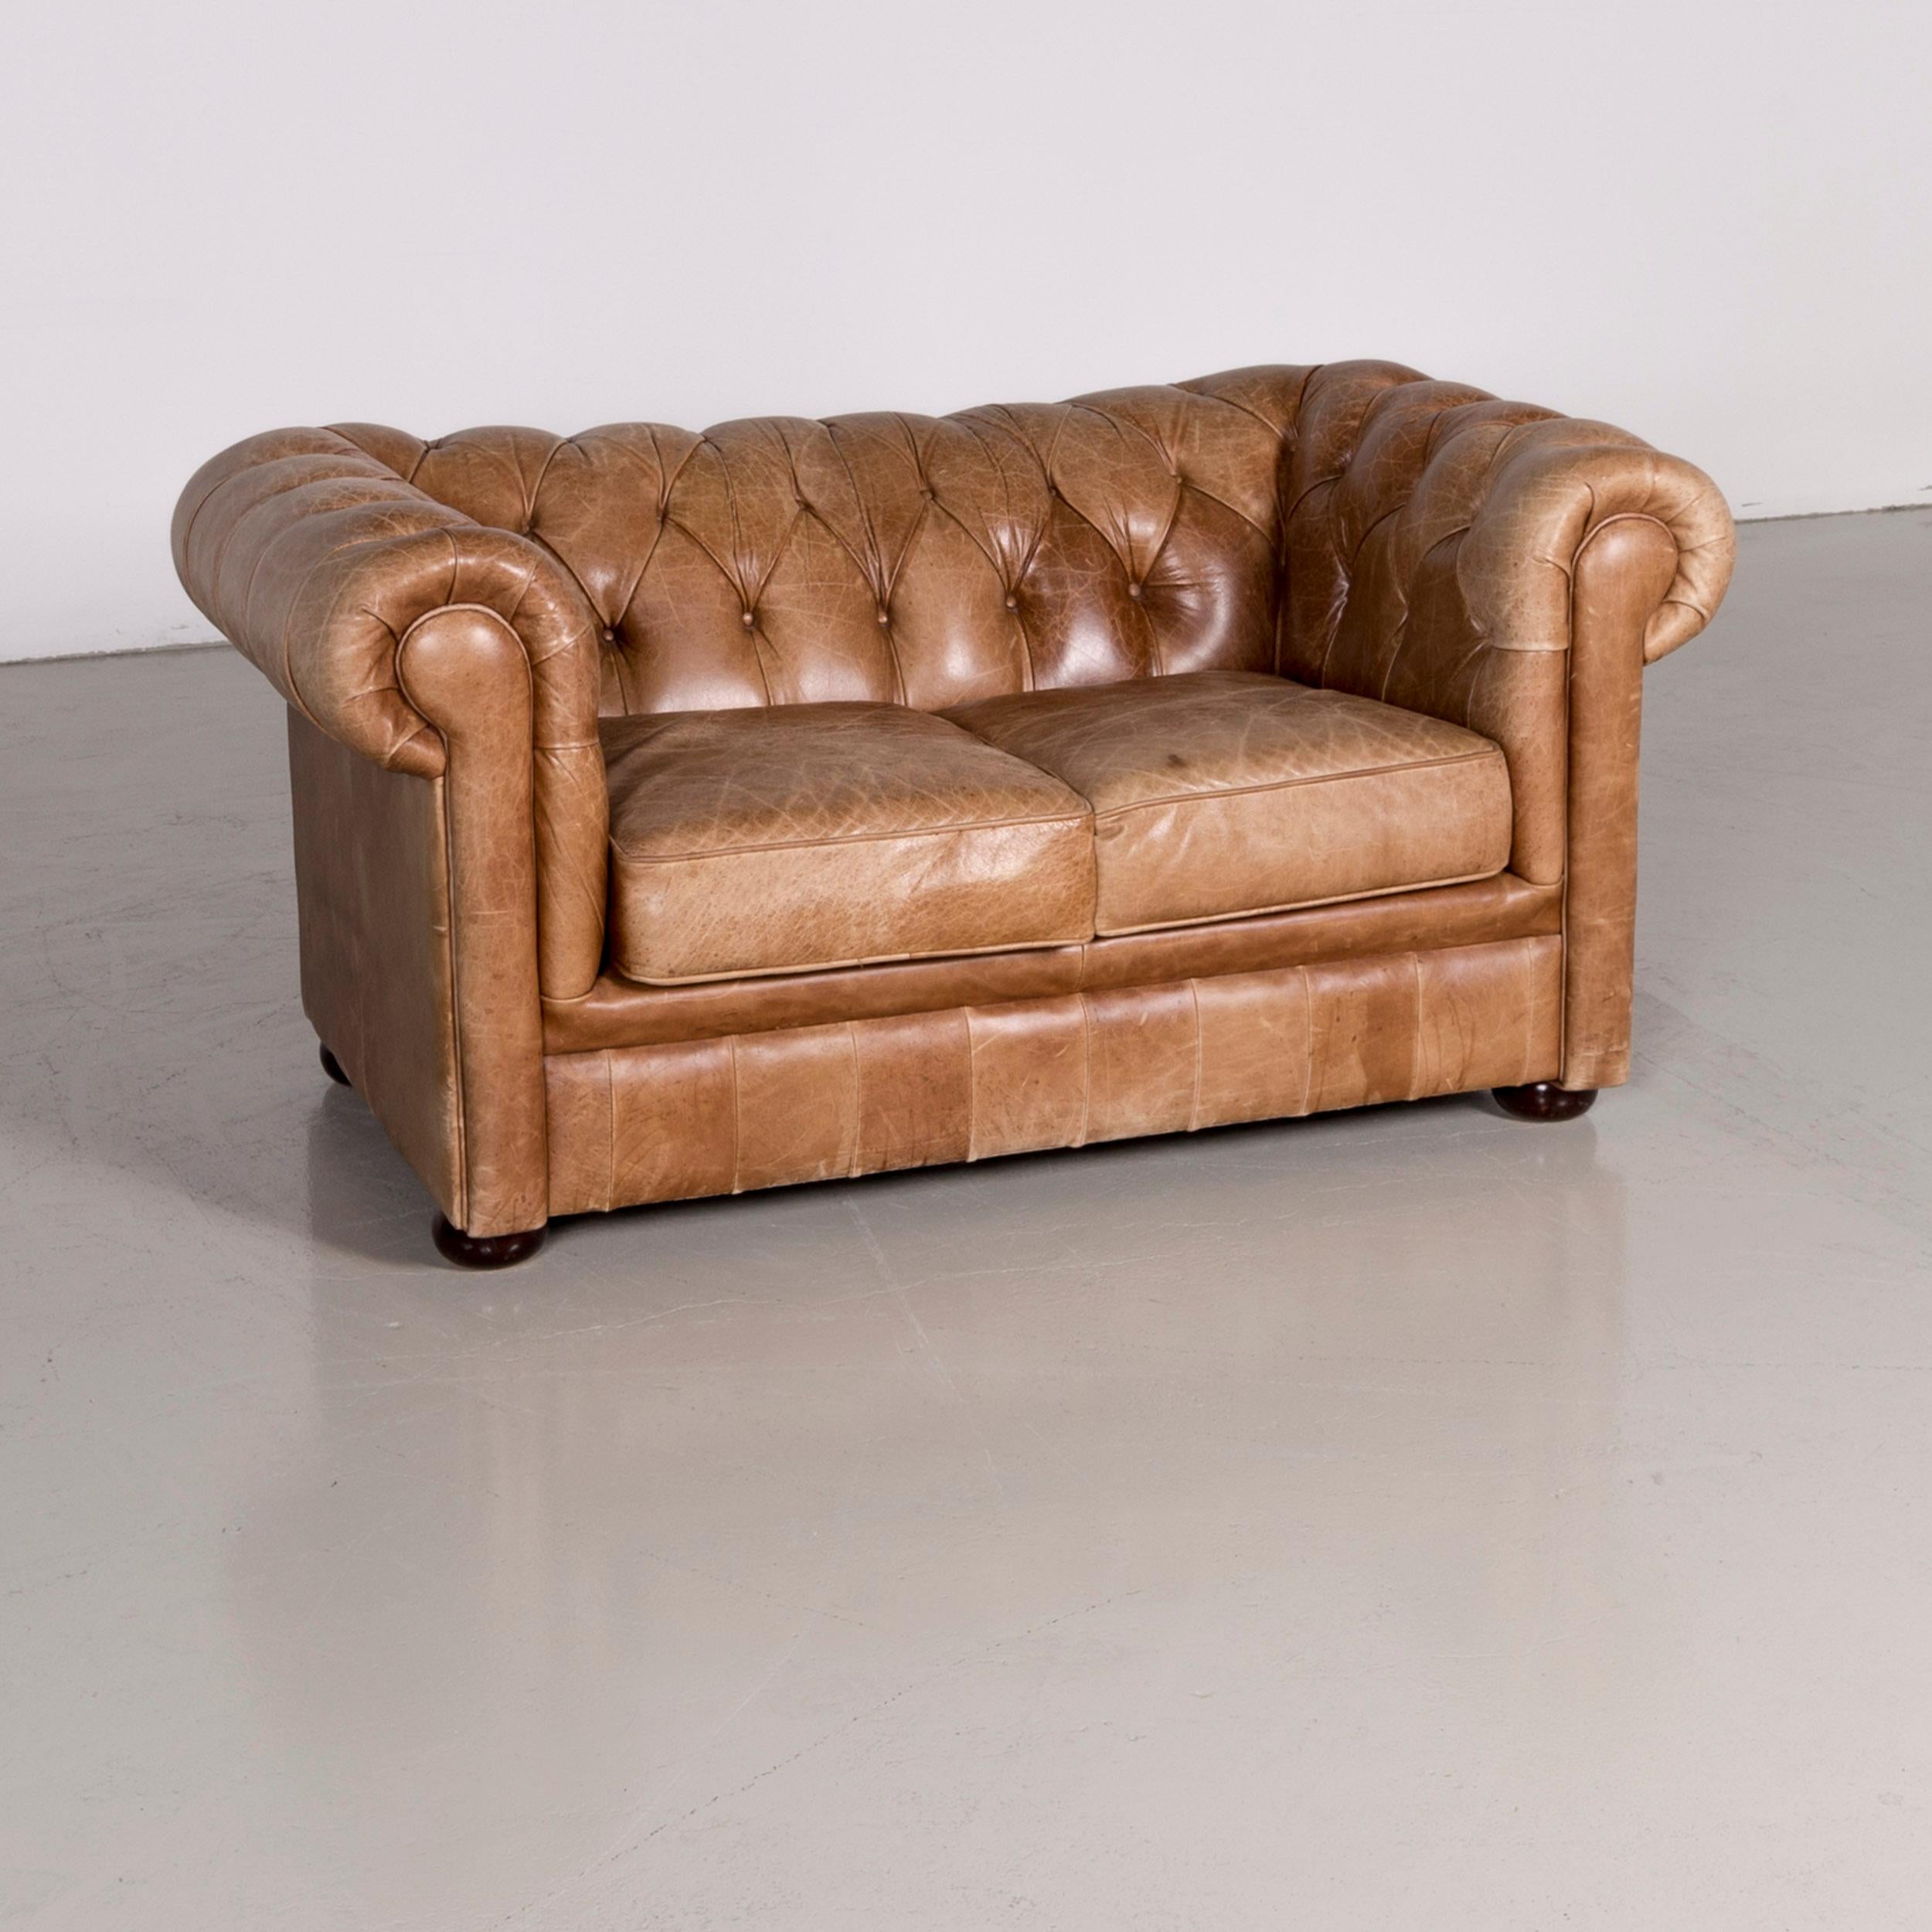 British Chesterfield Leather Sofa Brown Red Vintage Two-Seat Couch For Sale